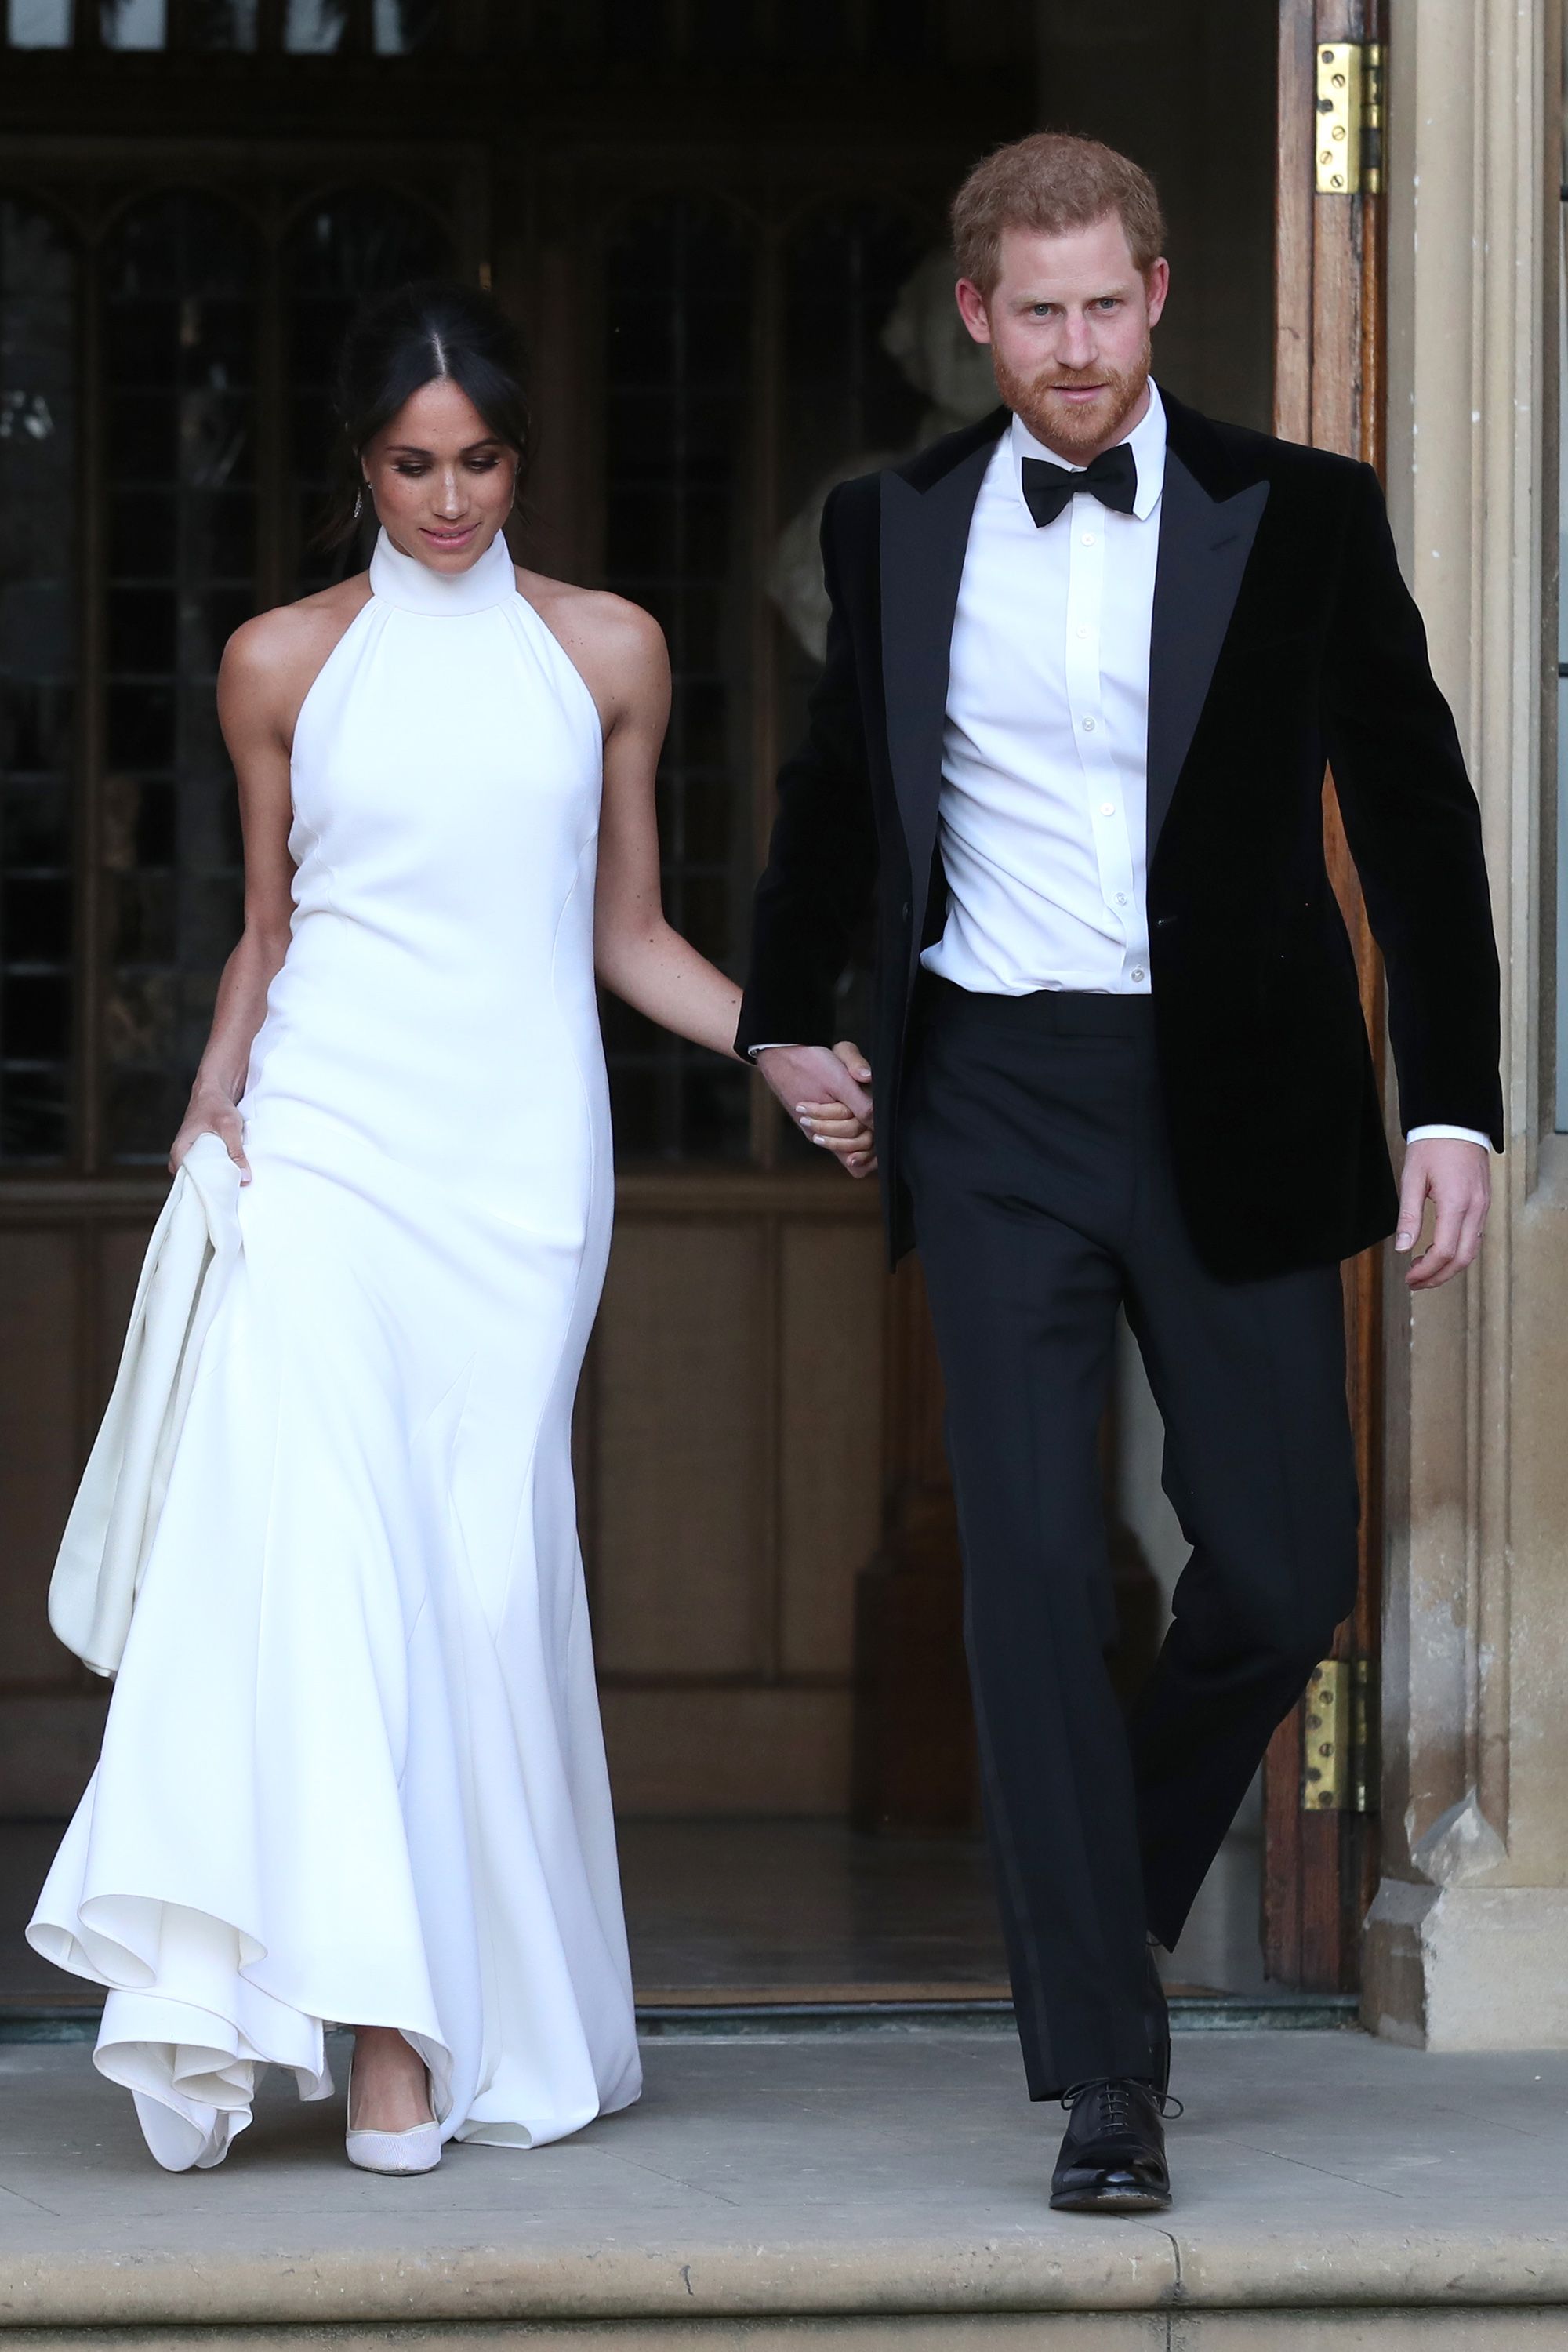 meghan markle inspired wedding gowns